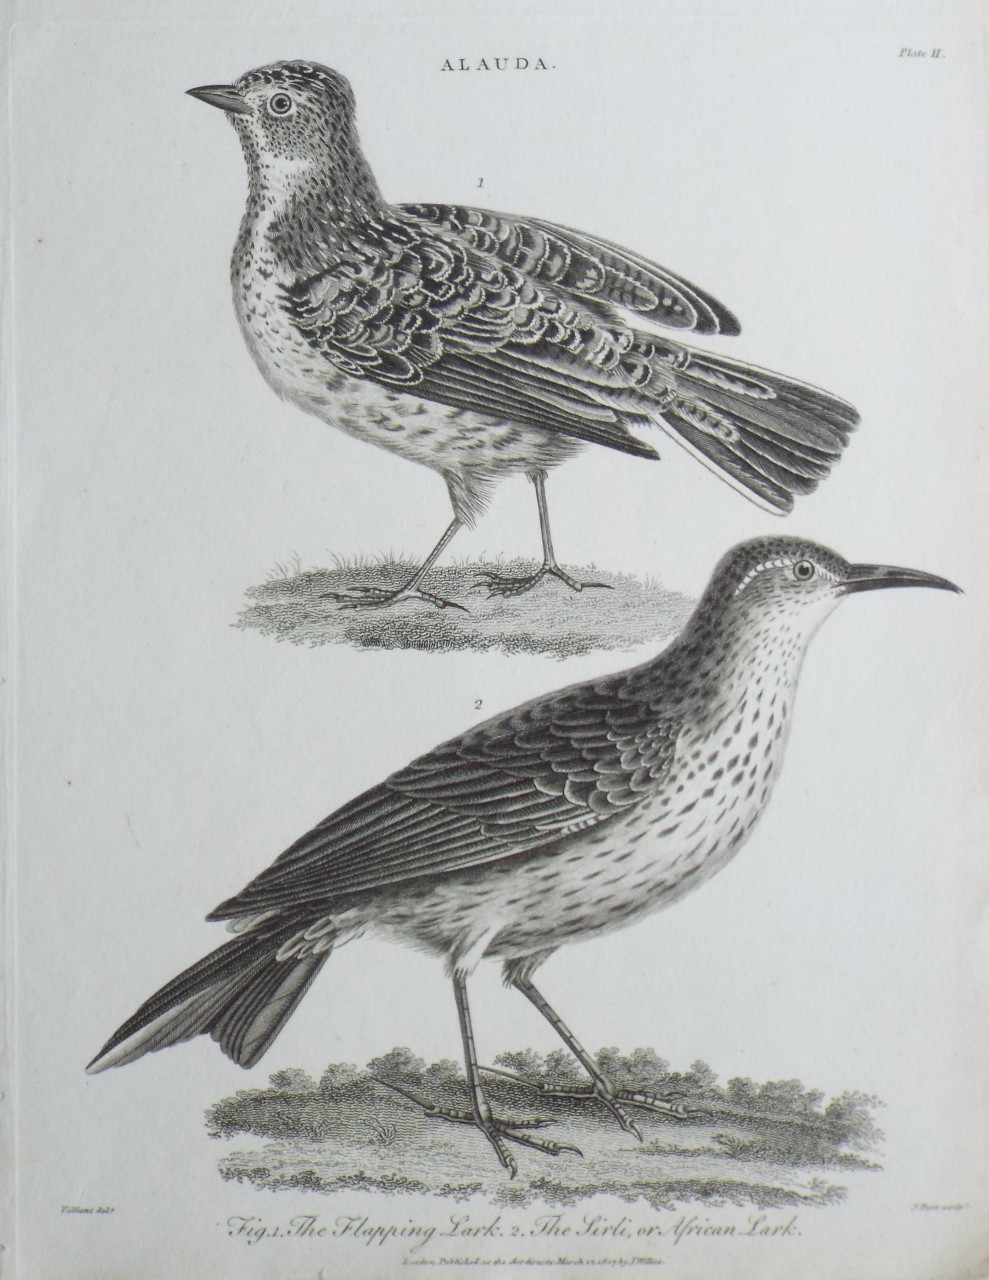 Print - Alauda. Fig.1. The Flapping Lark. 2. The Sirli, or African Lark. - Pass